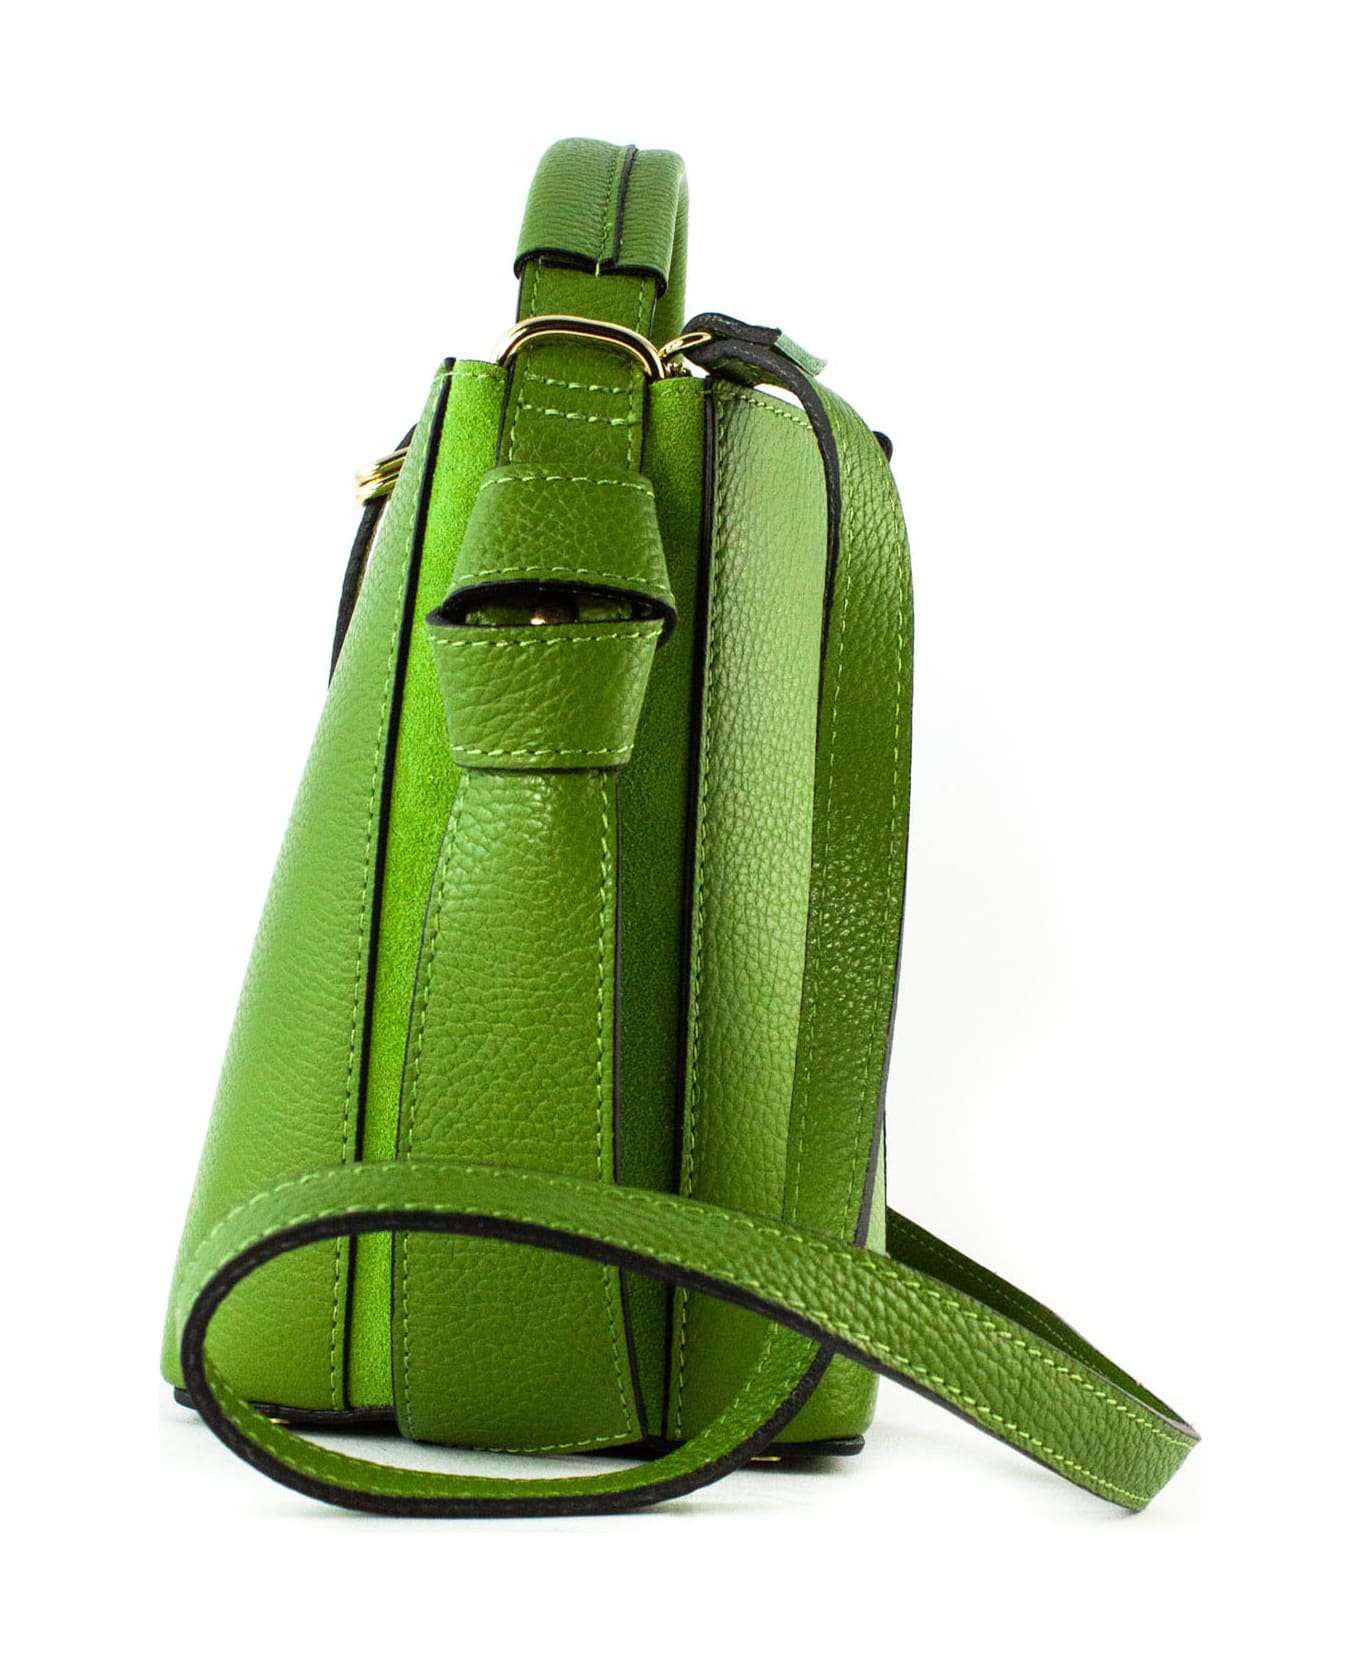 Avenue 67 Green Grained Leather Bag - Green トートバッグ